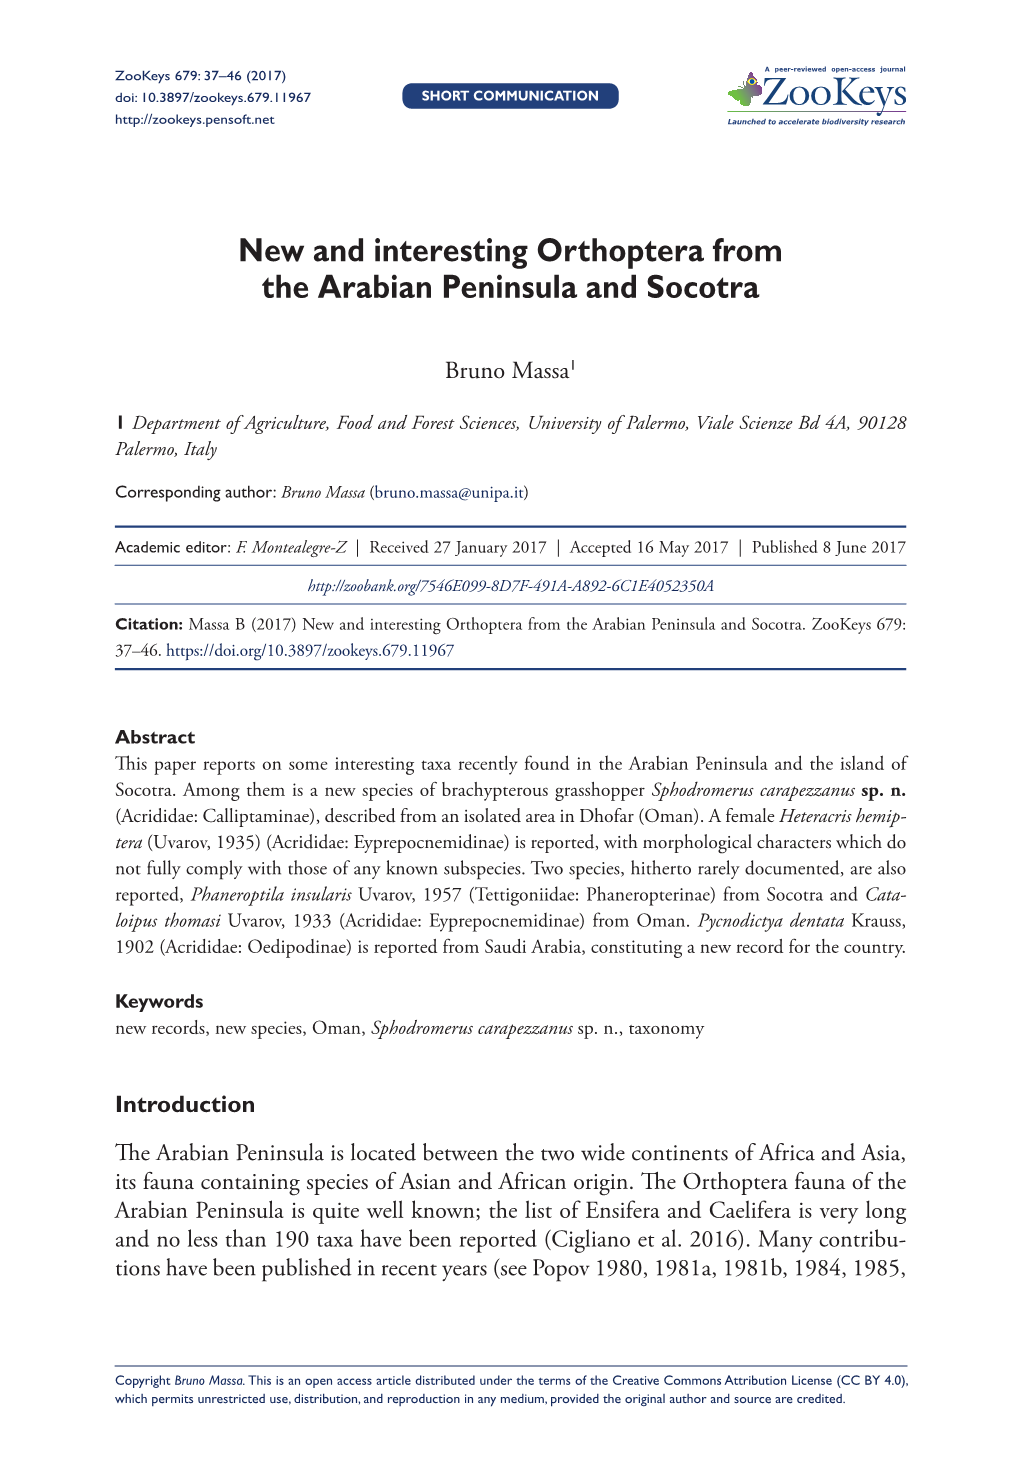 New and Interesting Orthoptera from the Arabian Peninsula and Socotra